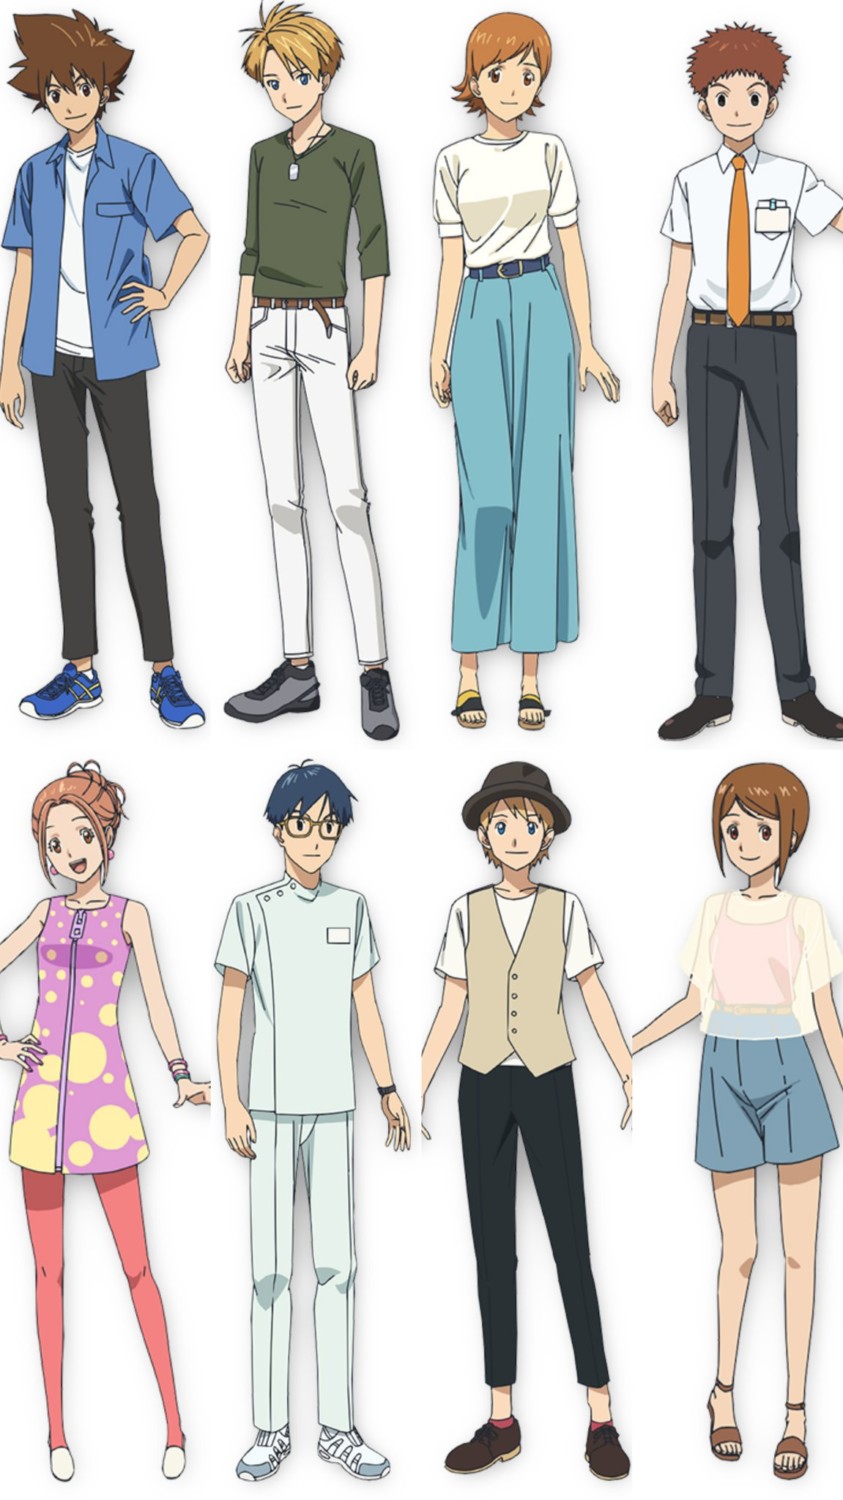 Digimon Adventure Last Evolution : Digimon Adventure: Last Evolution - Kizuna - Meanwhile, matt and others continue to work on digimon incidents and activities that help people with their partner digimon.